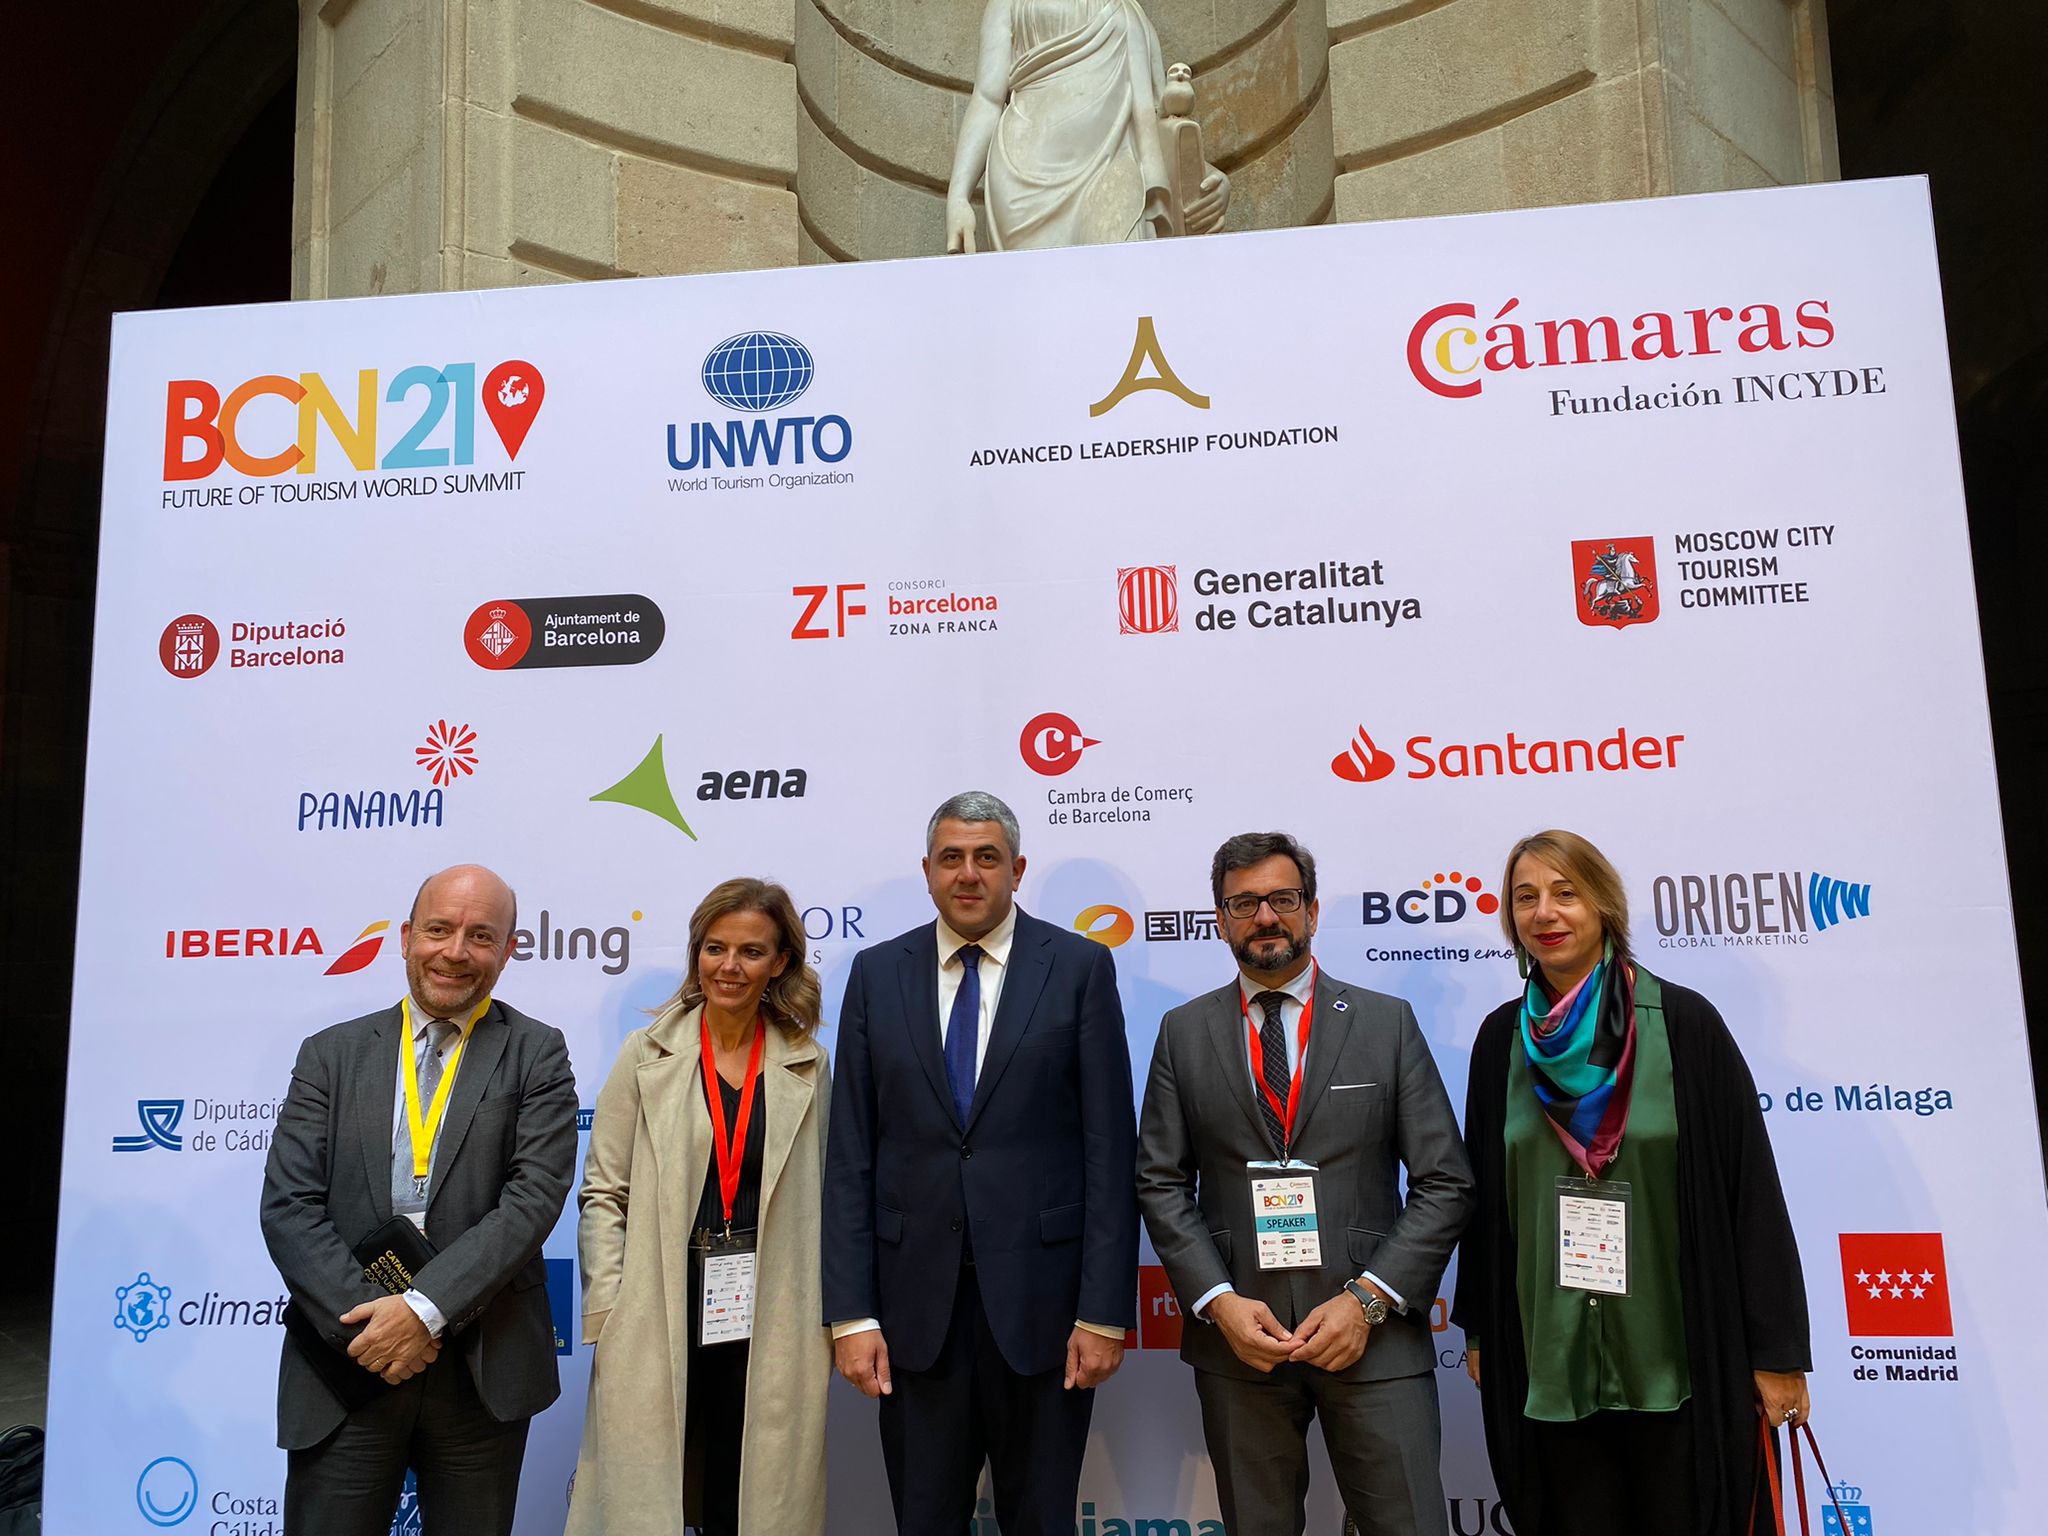 NECSTouR joined the Future of Tourism World Summit